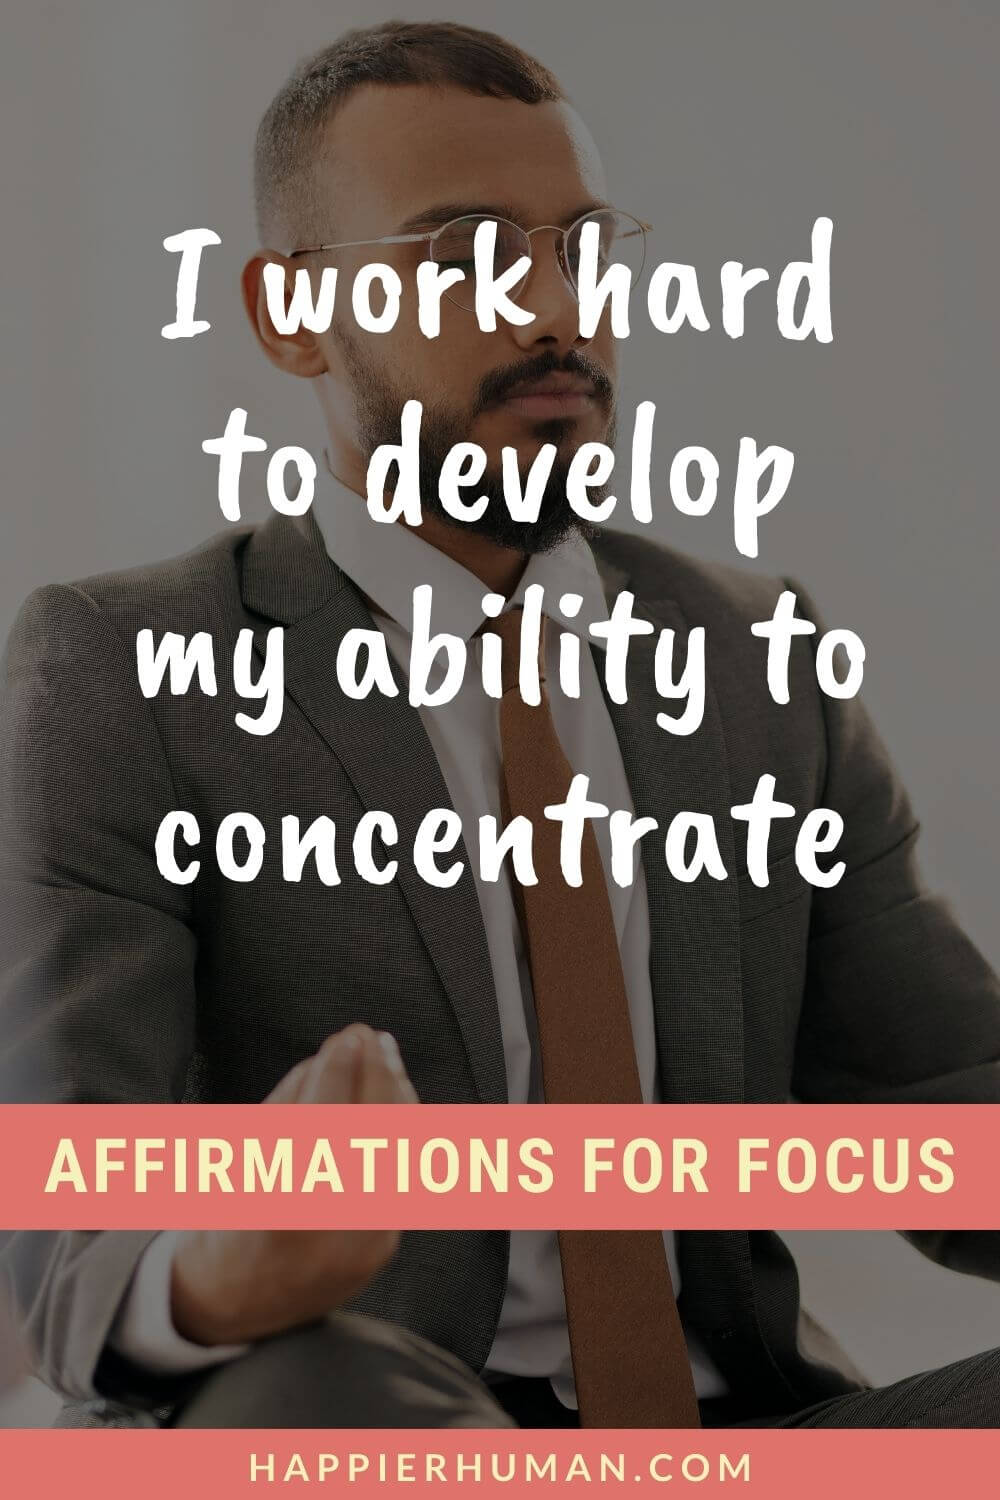 Affirmations for Focus - I work hard to develop my ability to concentrate | affirmations for productivity and focus | affirmations for achieving goals | affirmations for self love